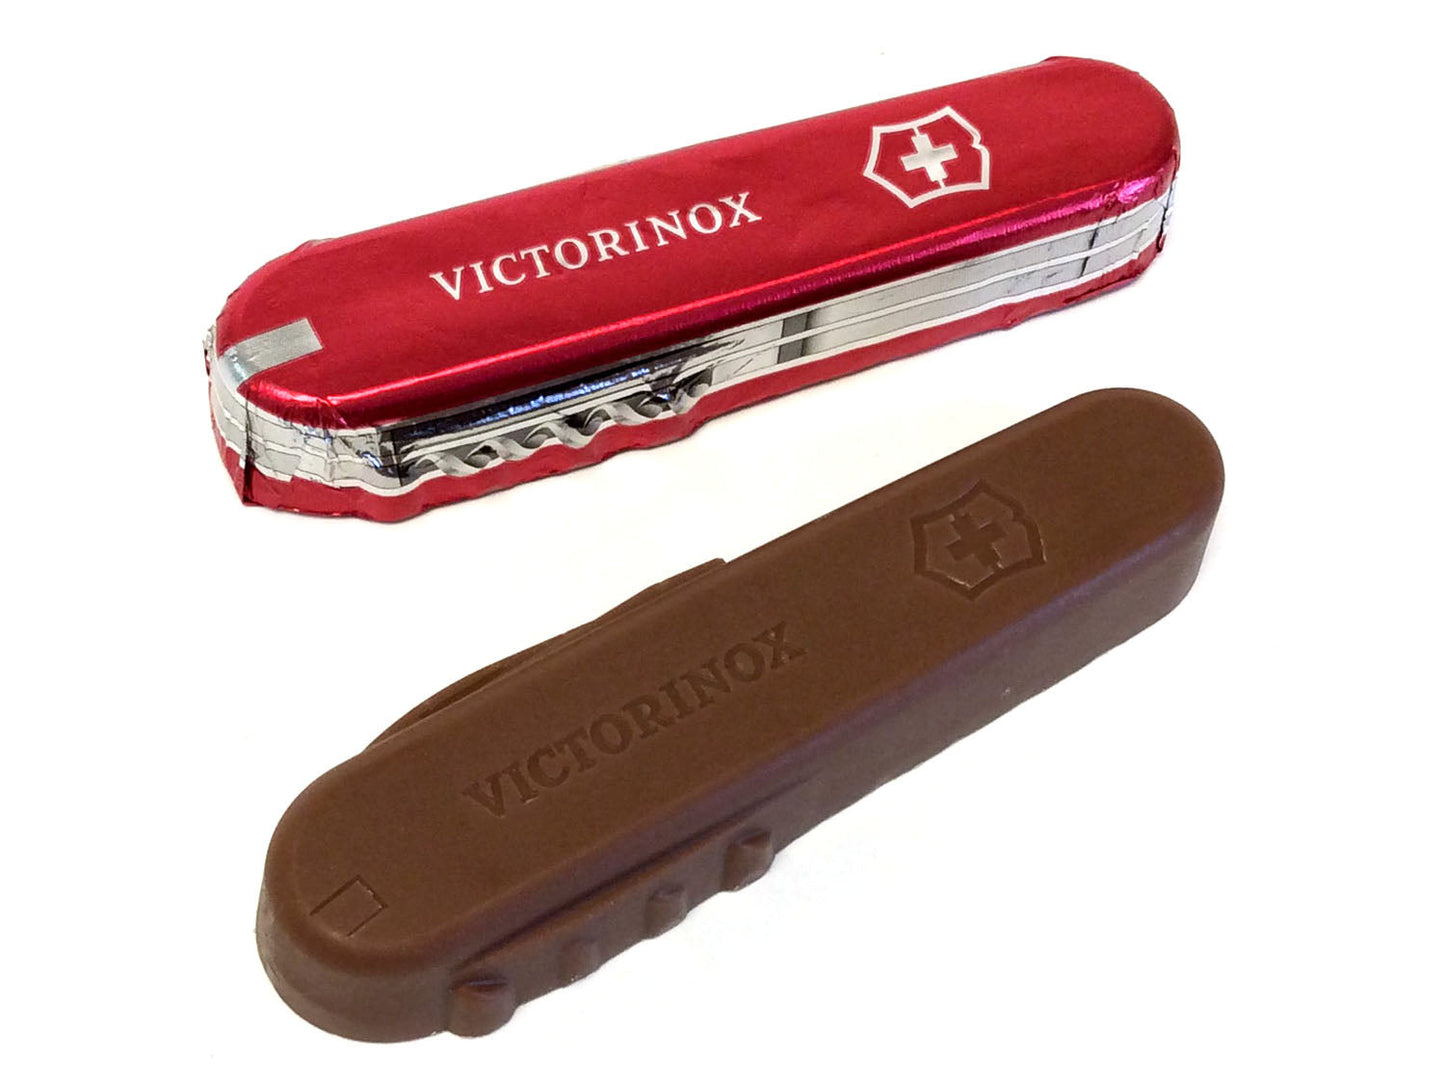 Chocolate Swiss Army Knife - 3.5 inches